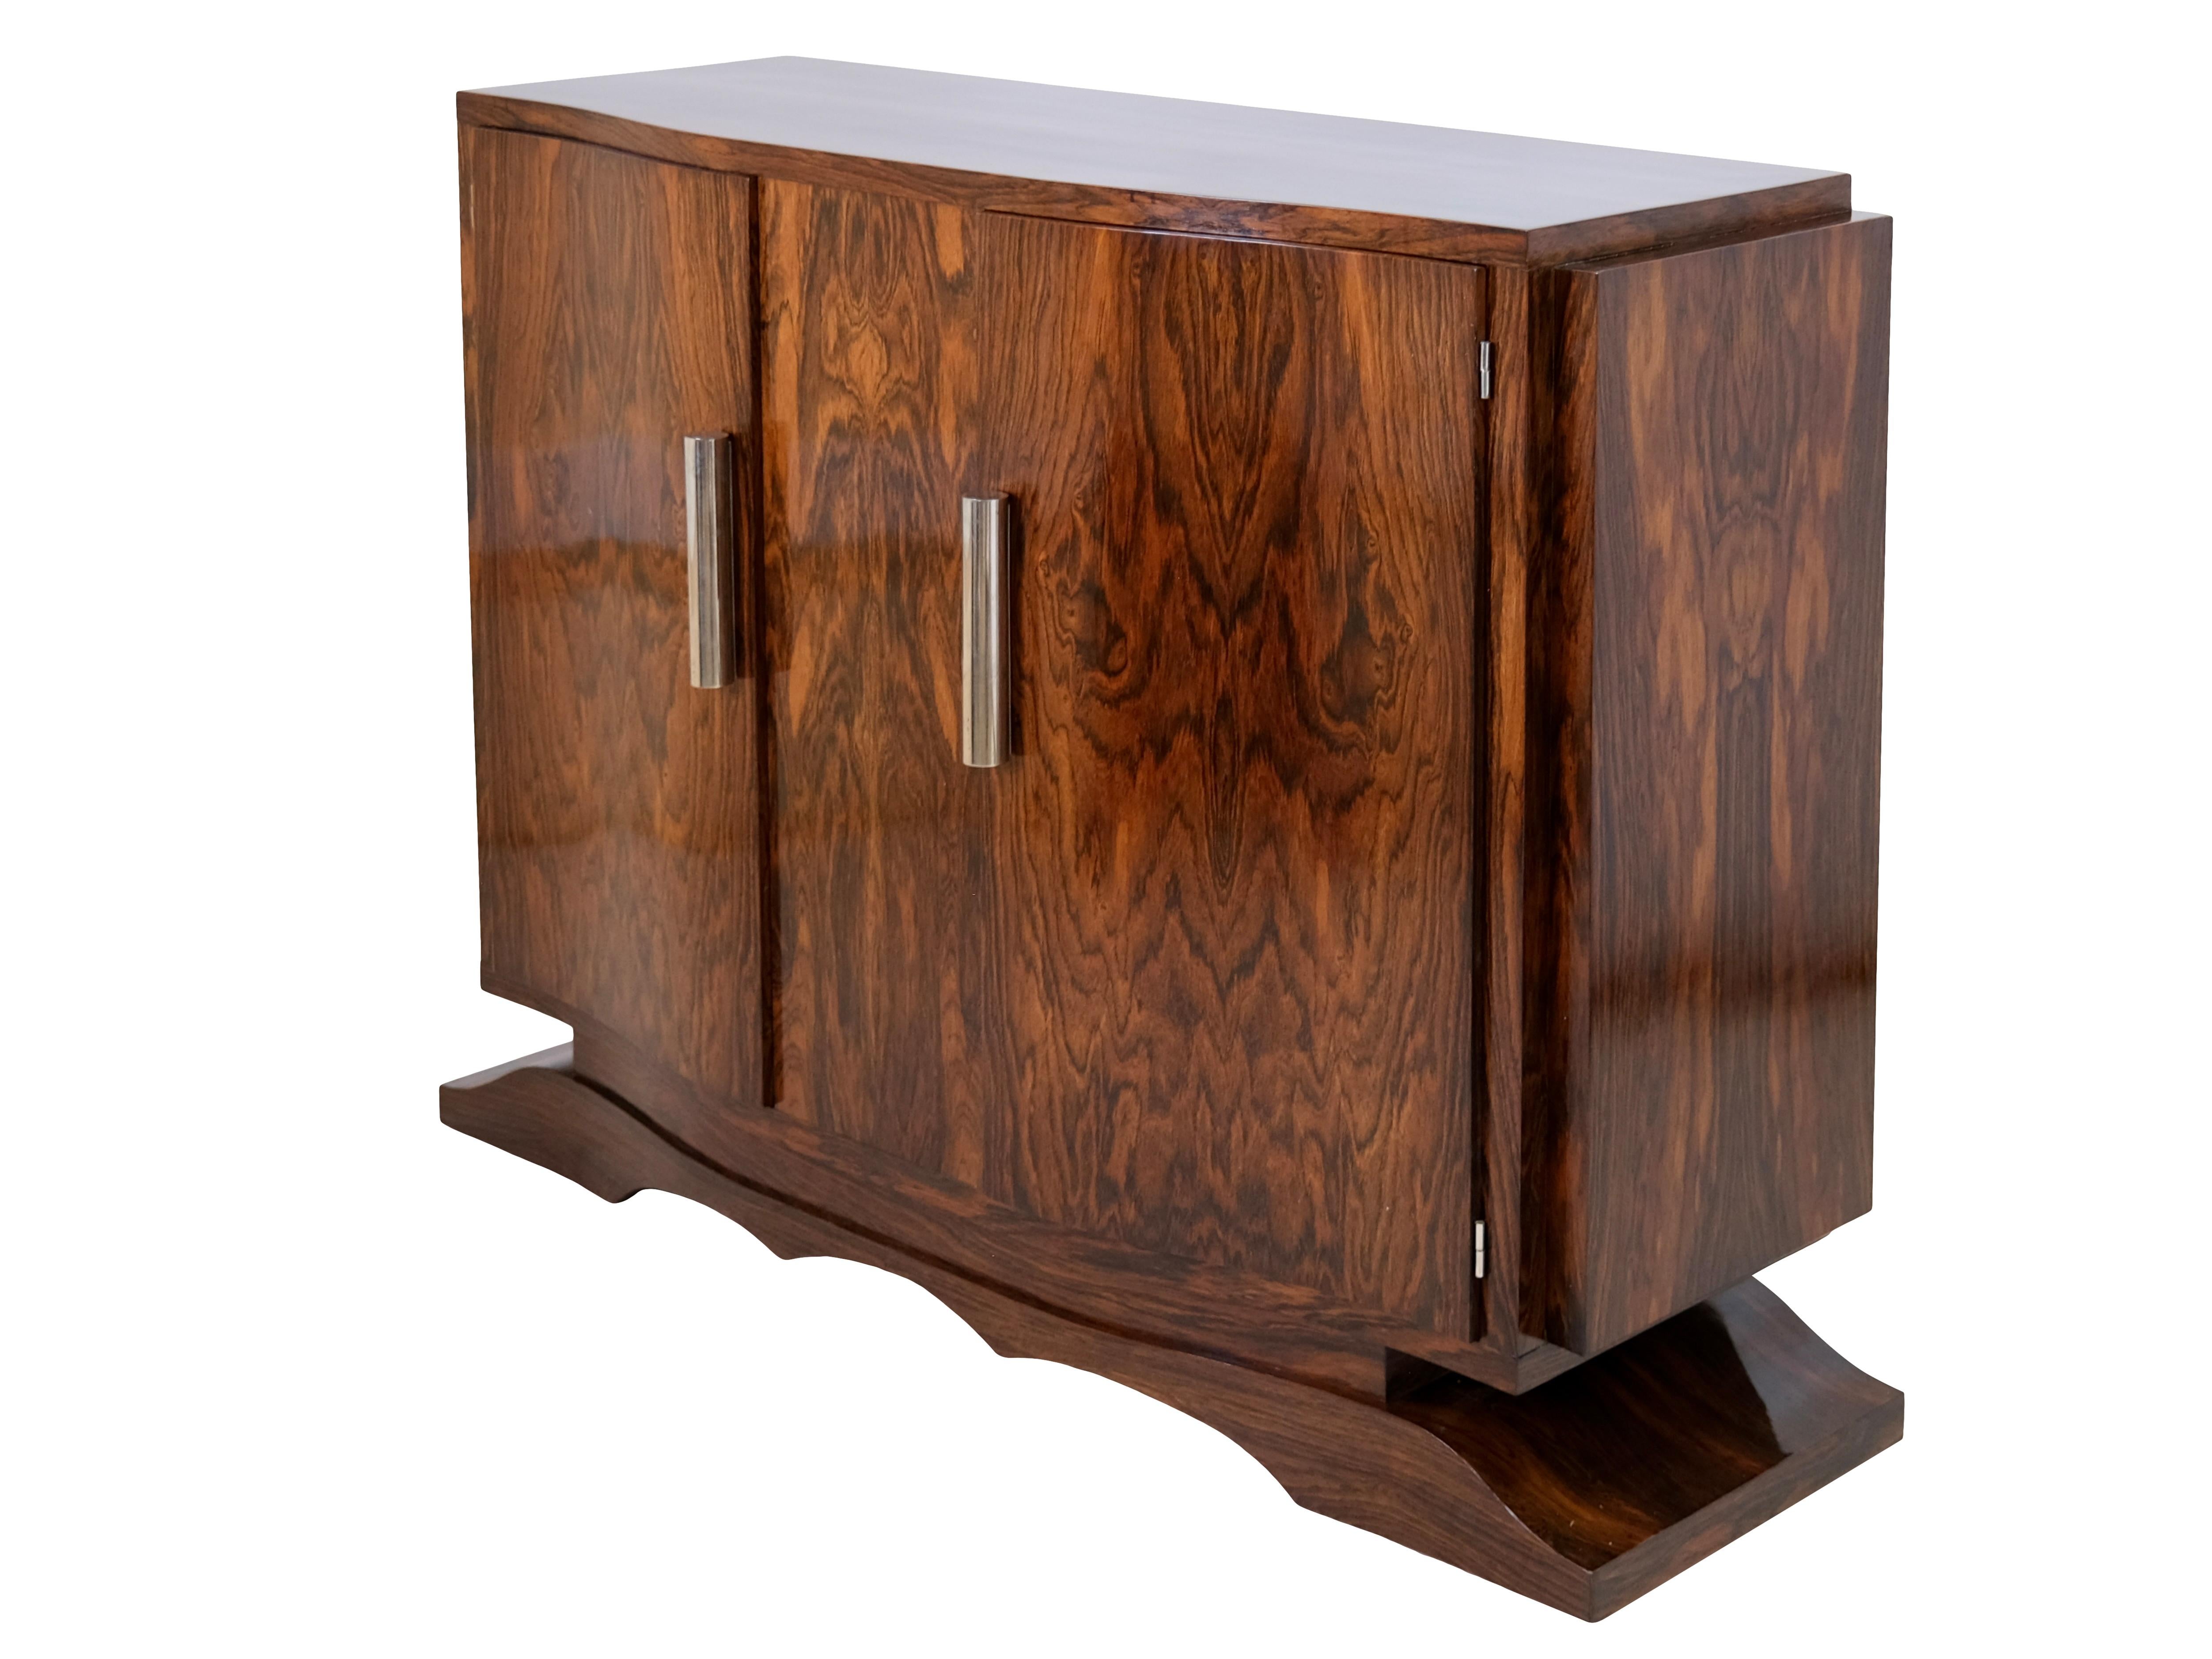 Polished 1930s French Art Deco Sideboard in Caucasian Nutwood with Sliding Fittings For Sale